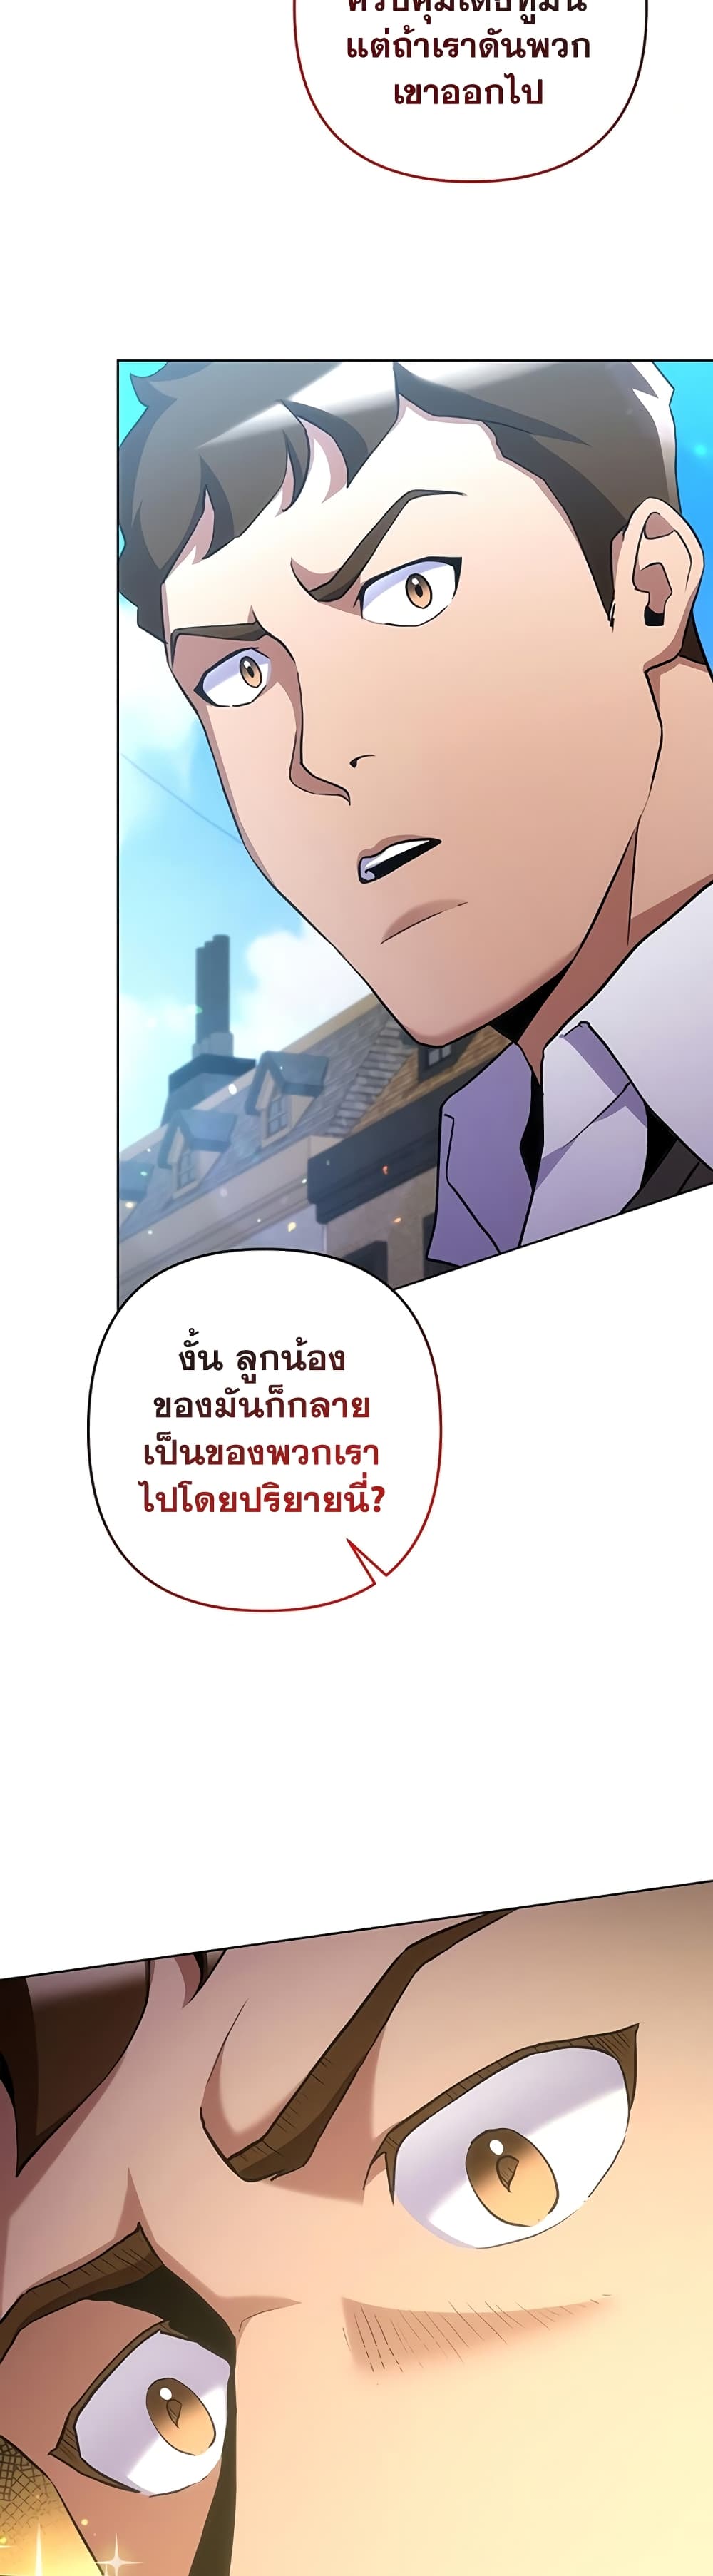 Surviving in an Action Manhwa 18 25